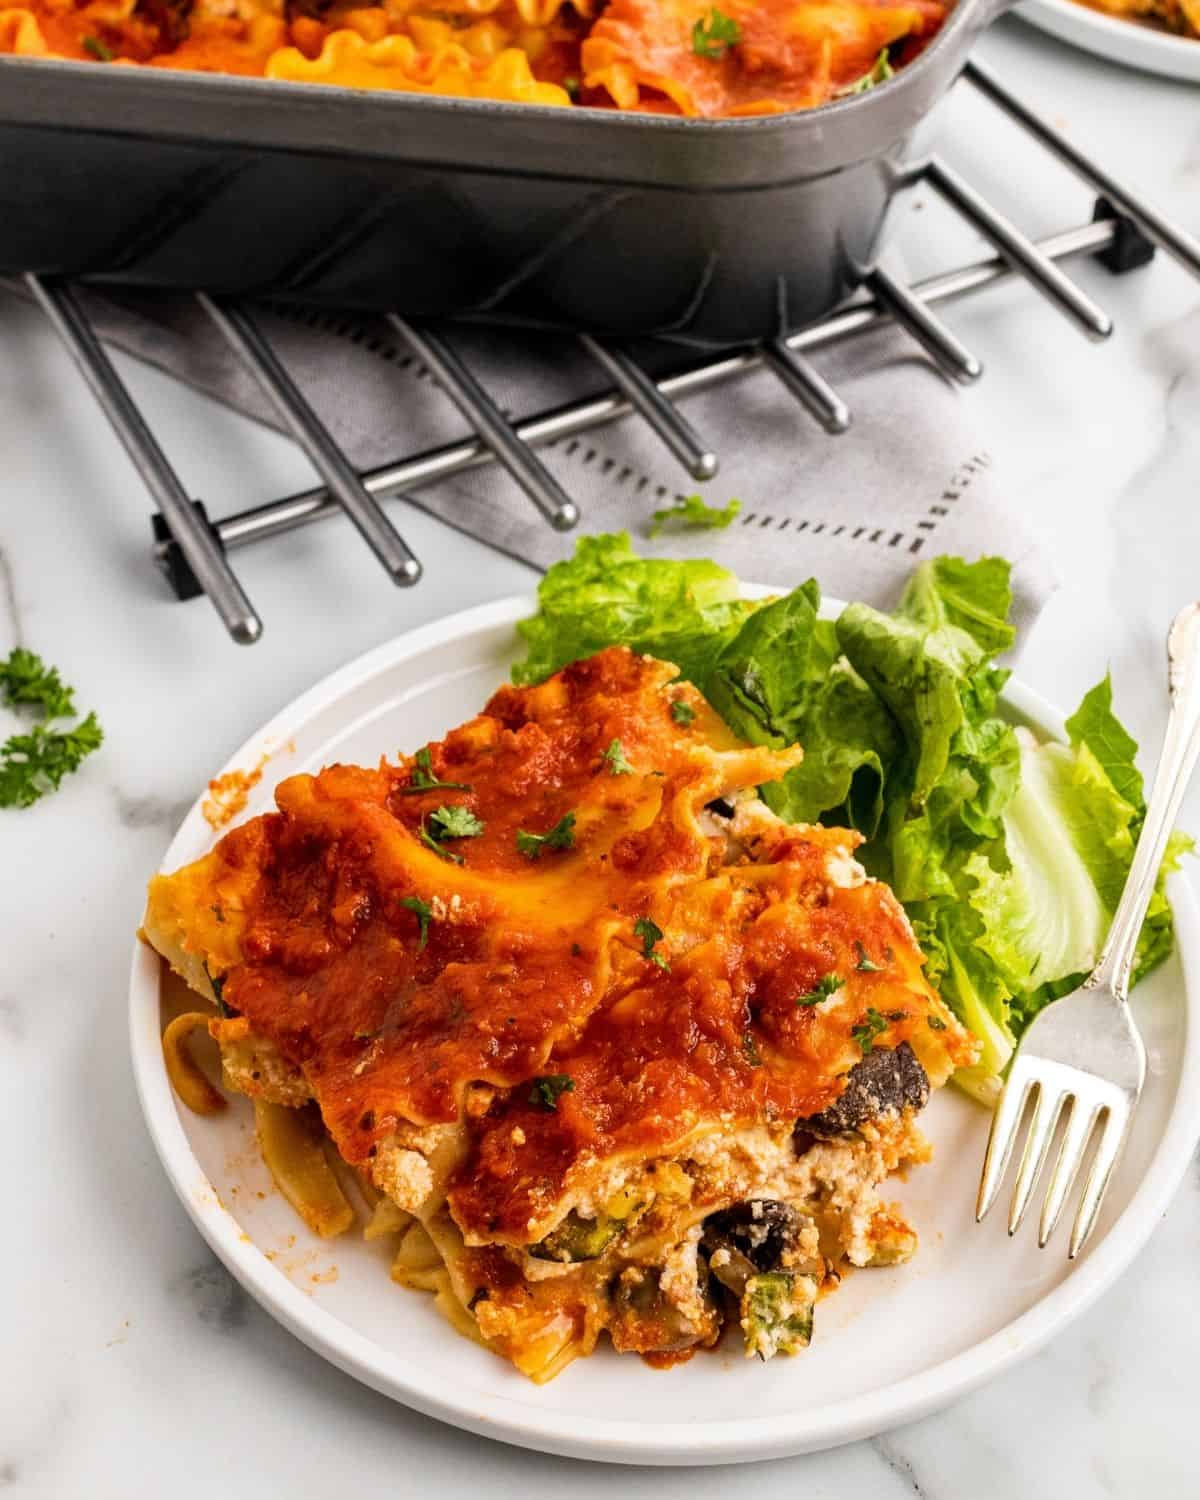 Vegetable lasagna on a plate with a fork.